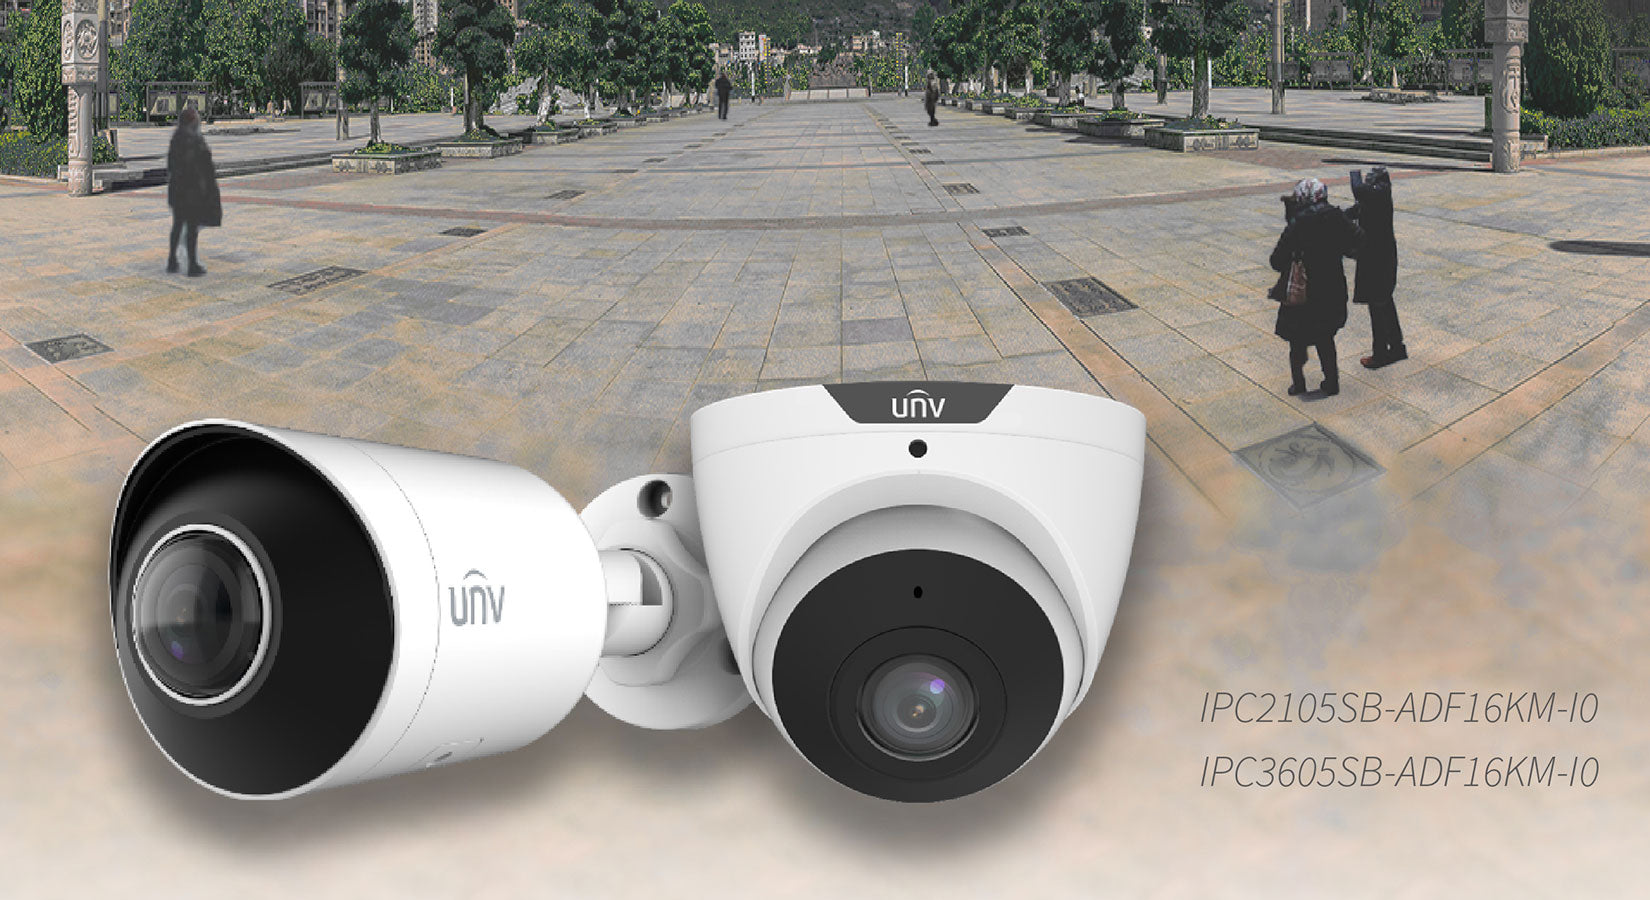 New UNV 5MP 180° Wide Angle Cameras Are Here | All Security Equipment